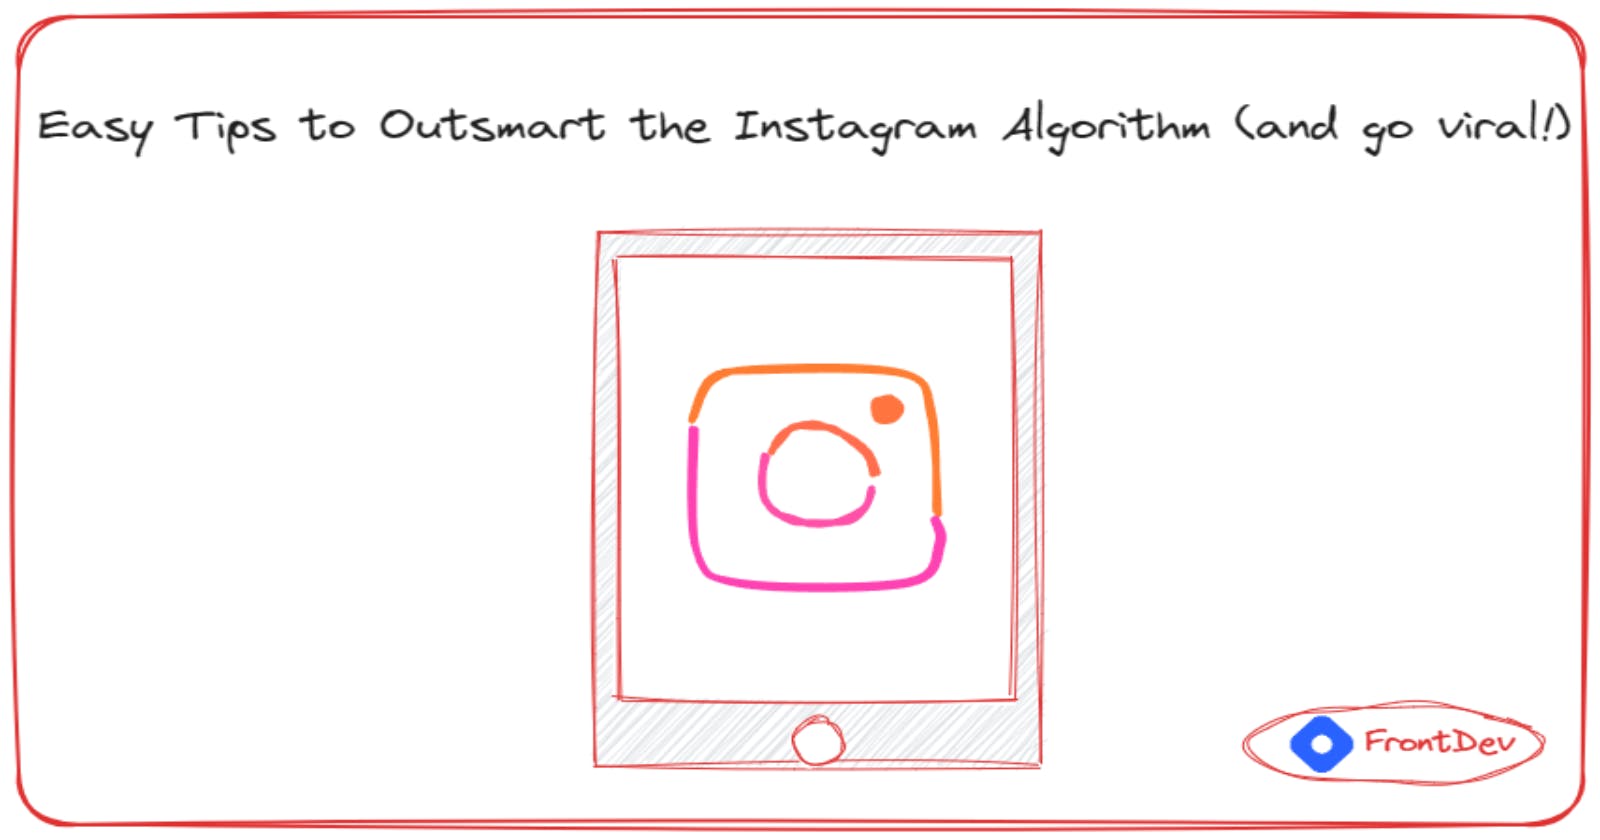 7 Easy Tips to Outsmart the Instagram Algorithm (and go viral!)